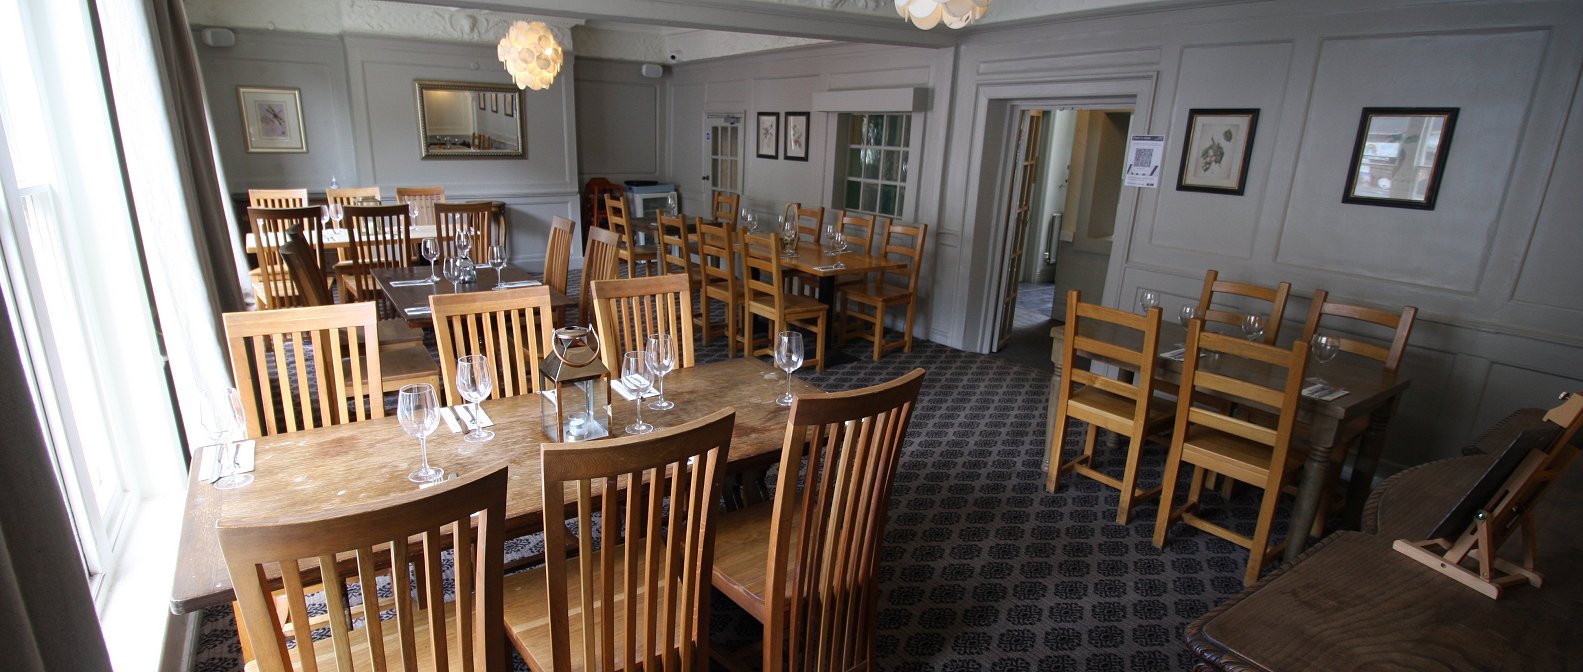 Restaurant & function room at The White Hart Hotel & Restaurant Whitchurch accommodation/bed-and-breakfast/pub food Newbury